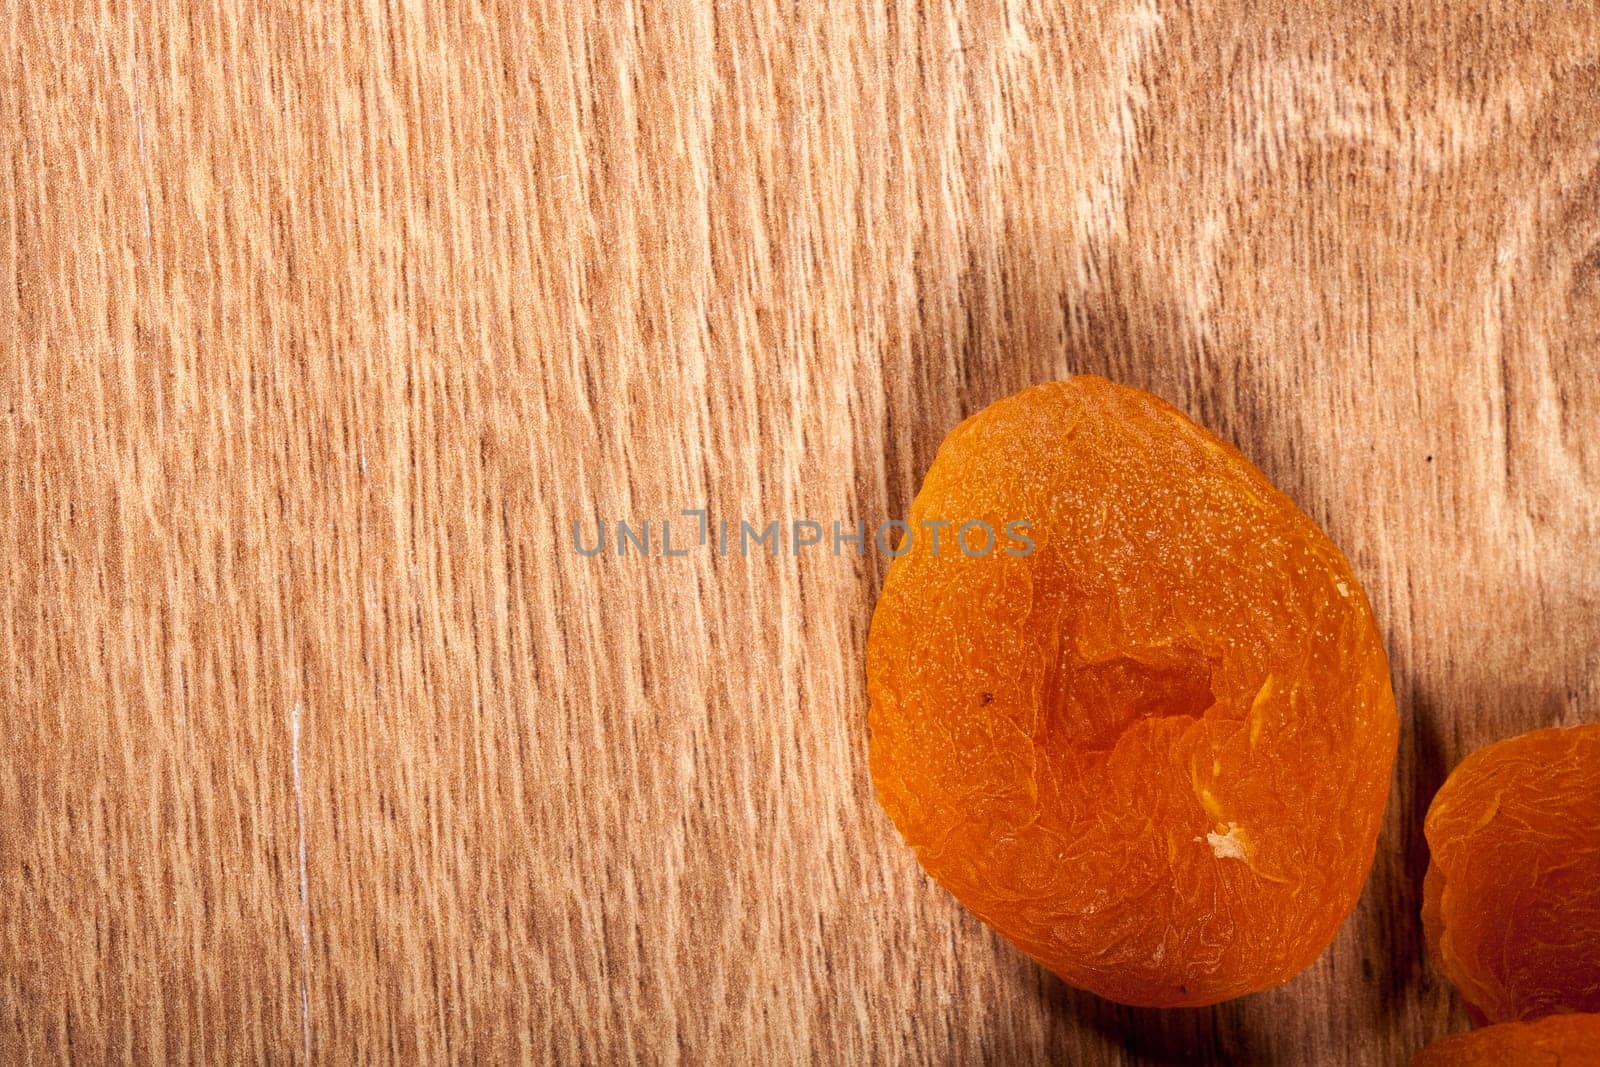 Mix of dried fruits on wooden background by DCStudio